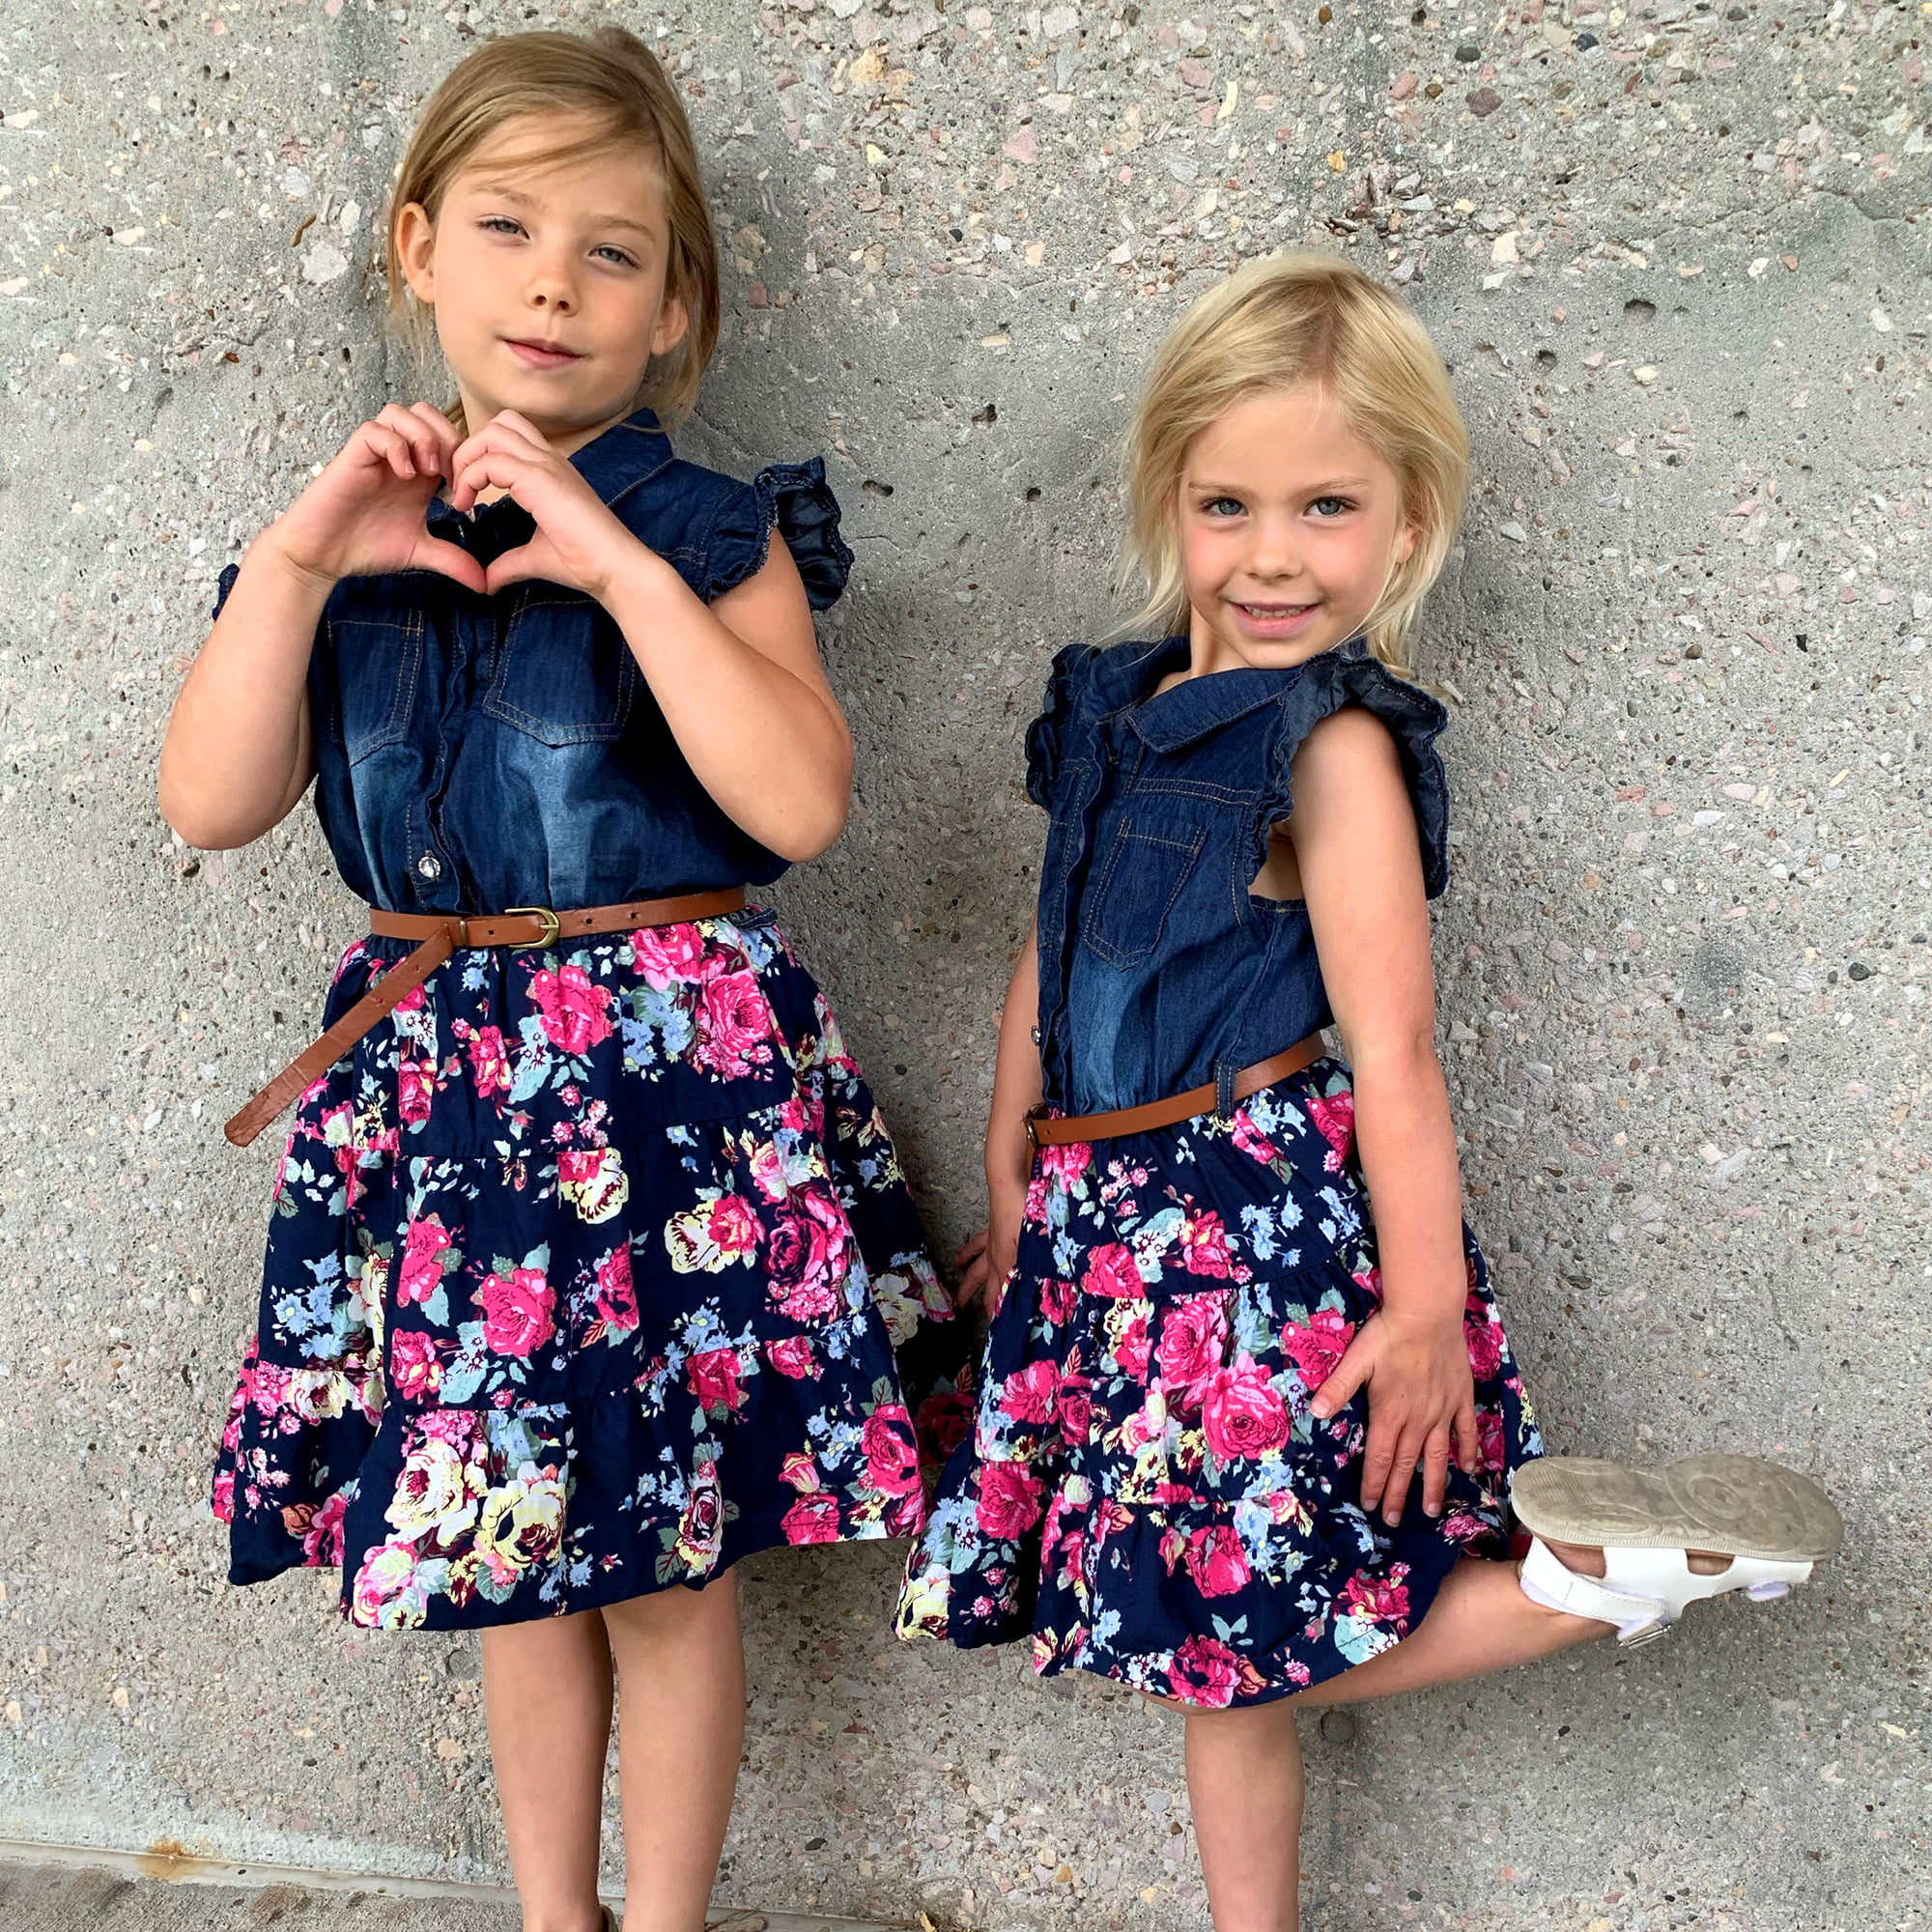 YJ.GWL Girls Dresses Denim Floral Swing Skirt with Belt Girls Fashion Clothes for 7-8 Years Size 150 Blue, 7 Years, 7 Years